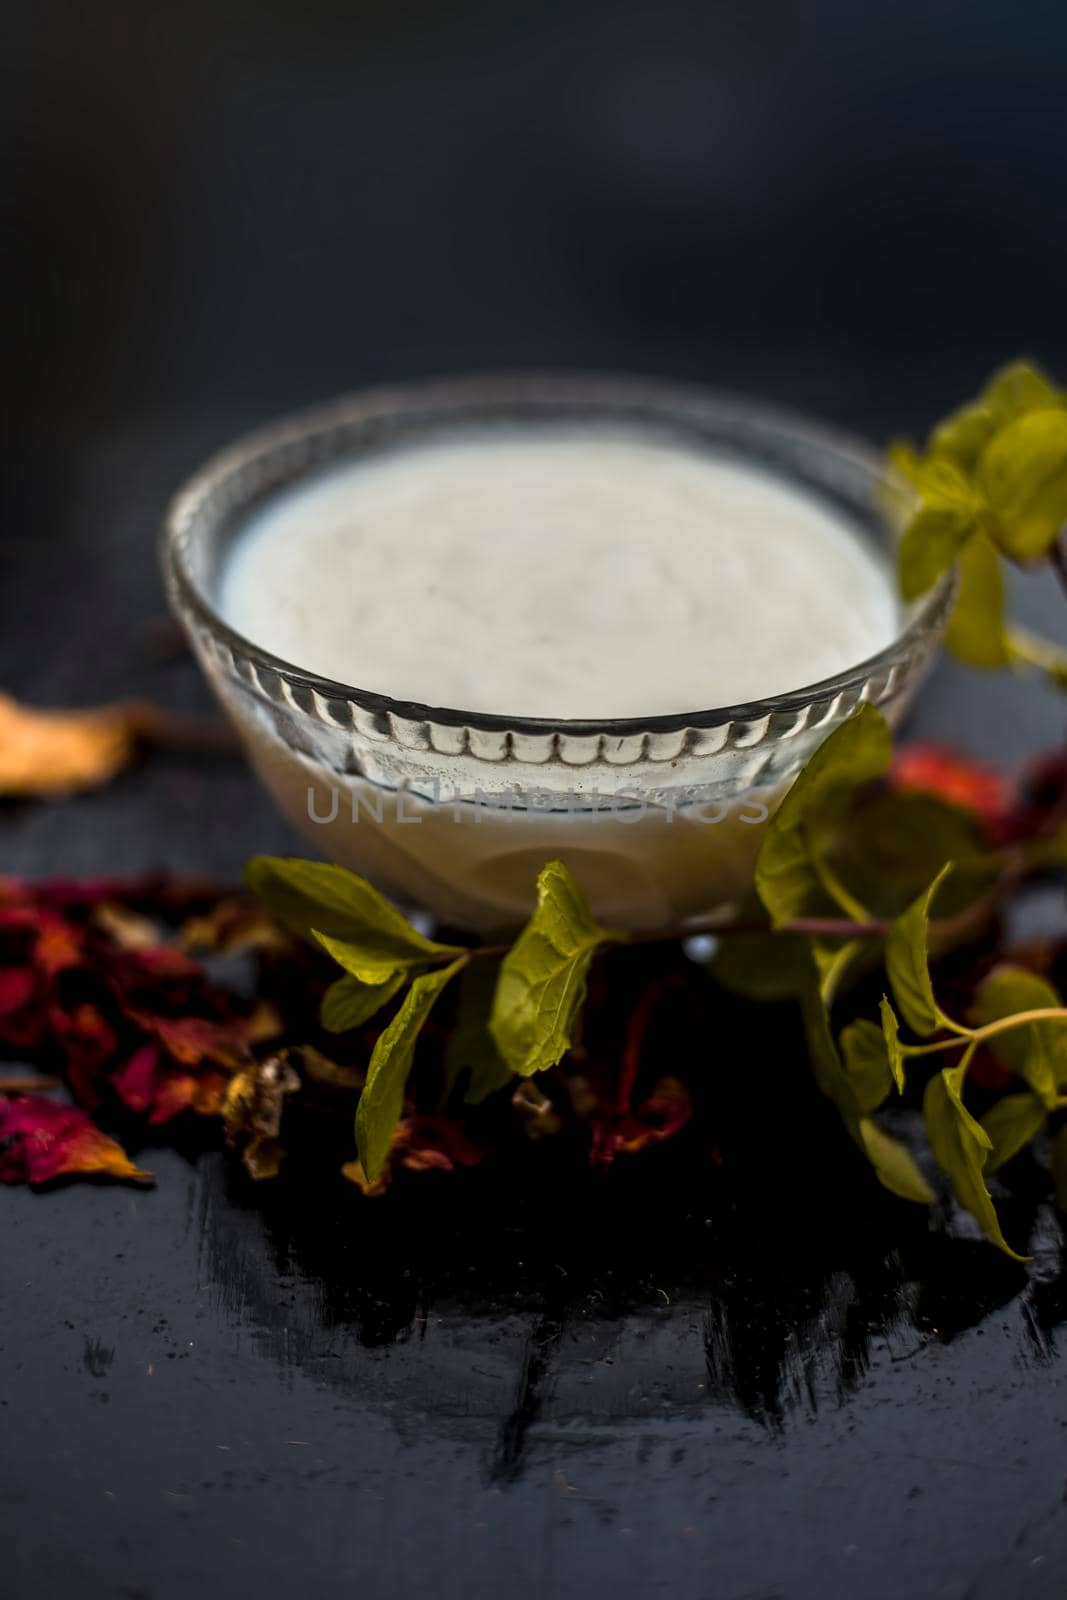 Homemade DIY face mask on the wooden surface consisting of yogurt,multani mitti or mulpani mitti (fuller's earth) and mint leaves in a glass bowl. For the treatment removal of dark patches. by mirzamlk